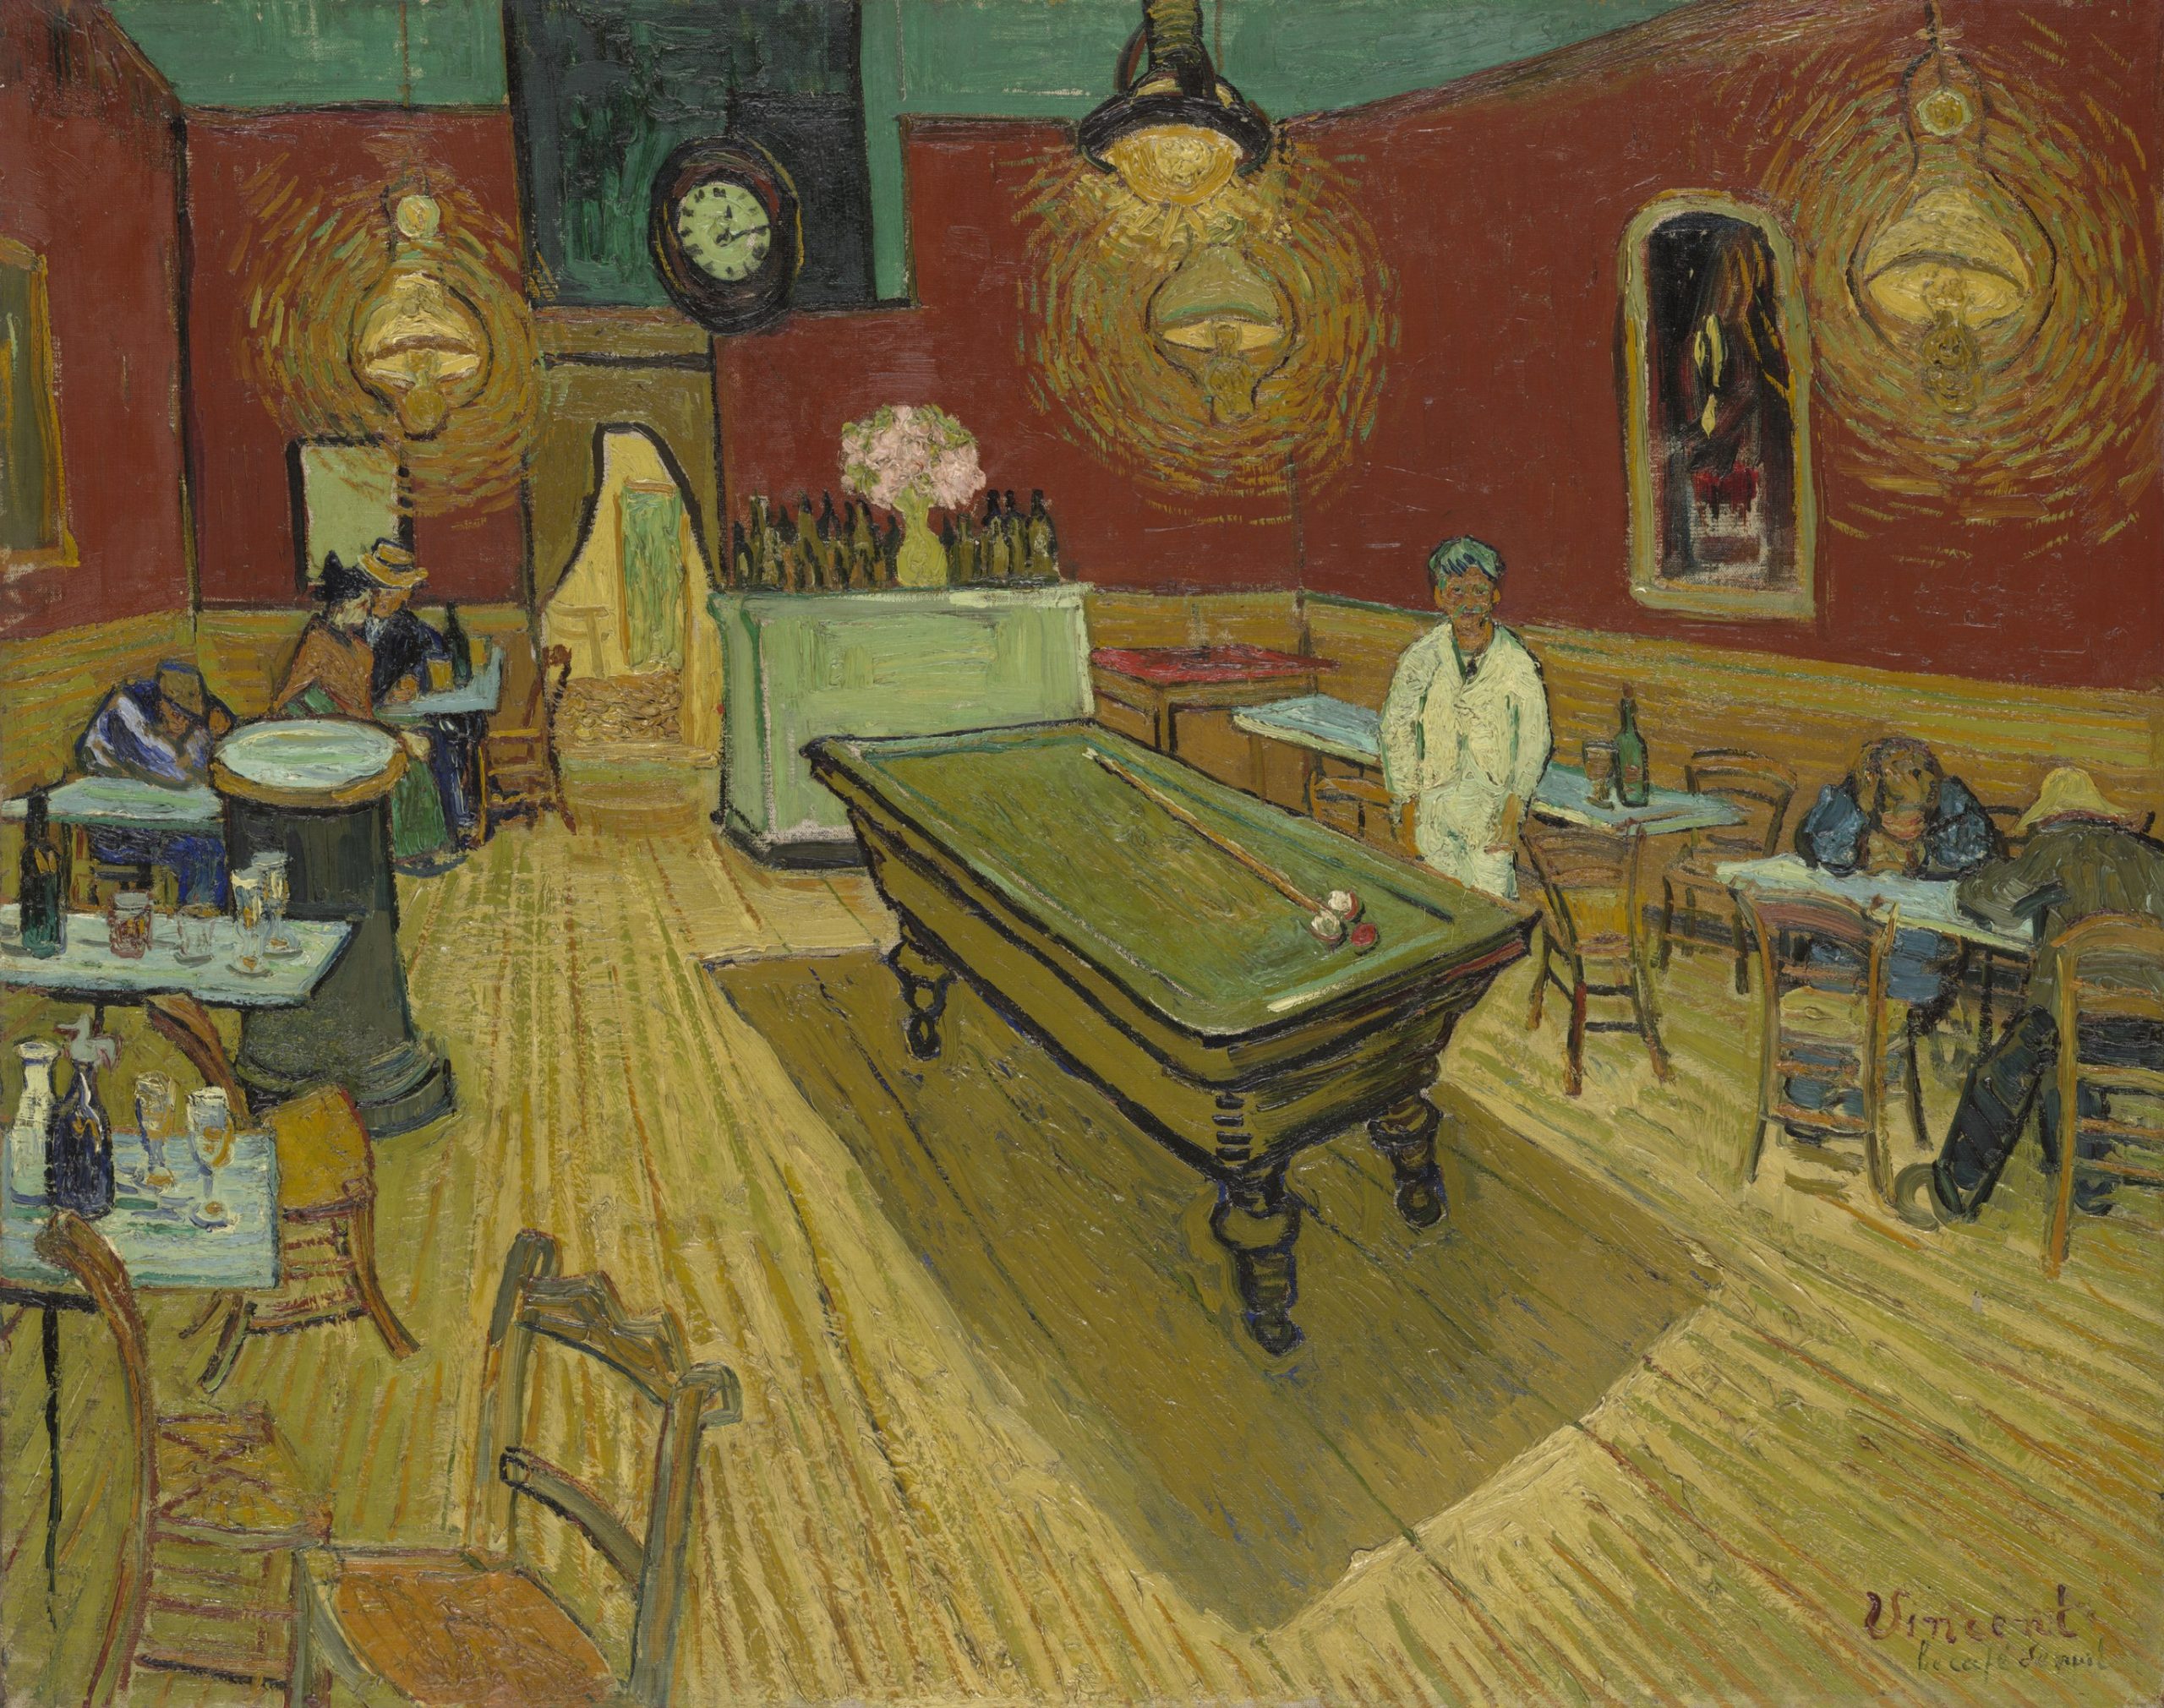 A view inside a café where a billiards table occupies the centre with townspeople seated at tables around it